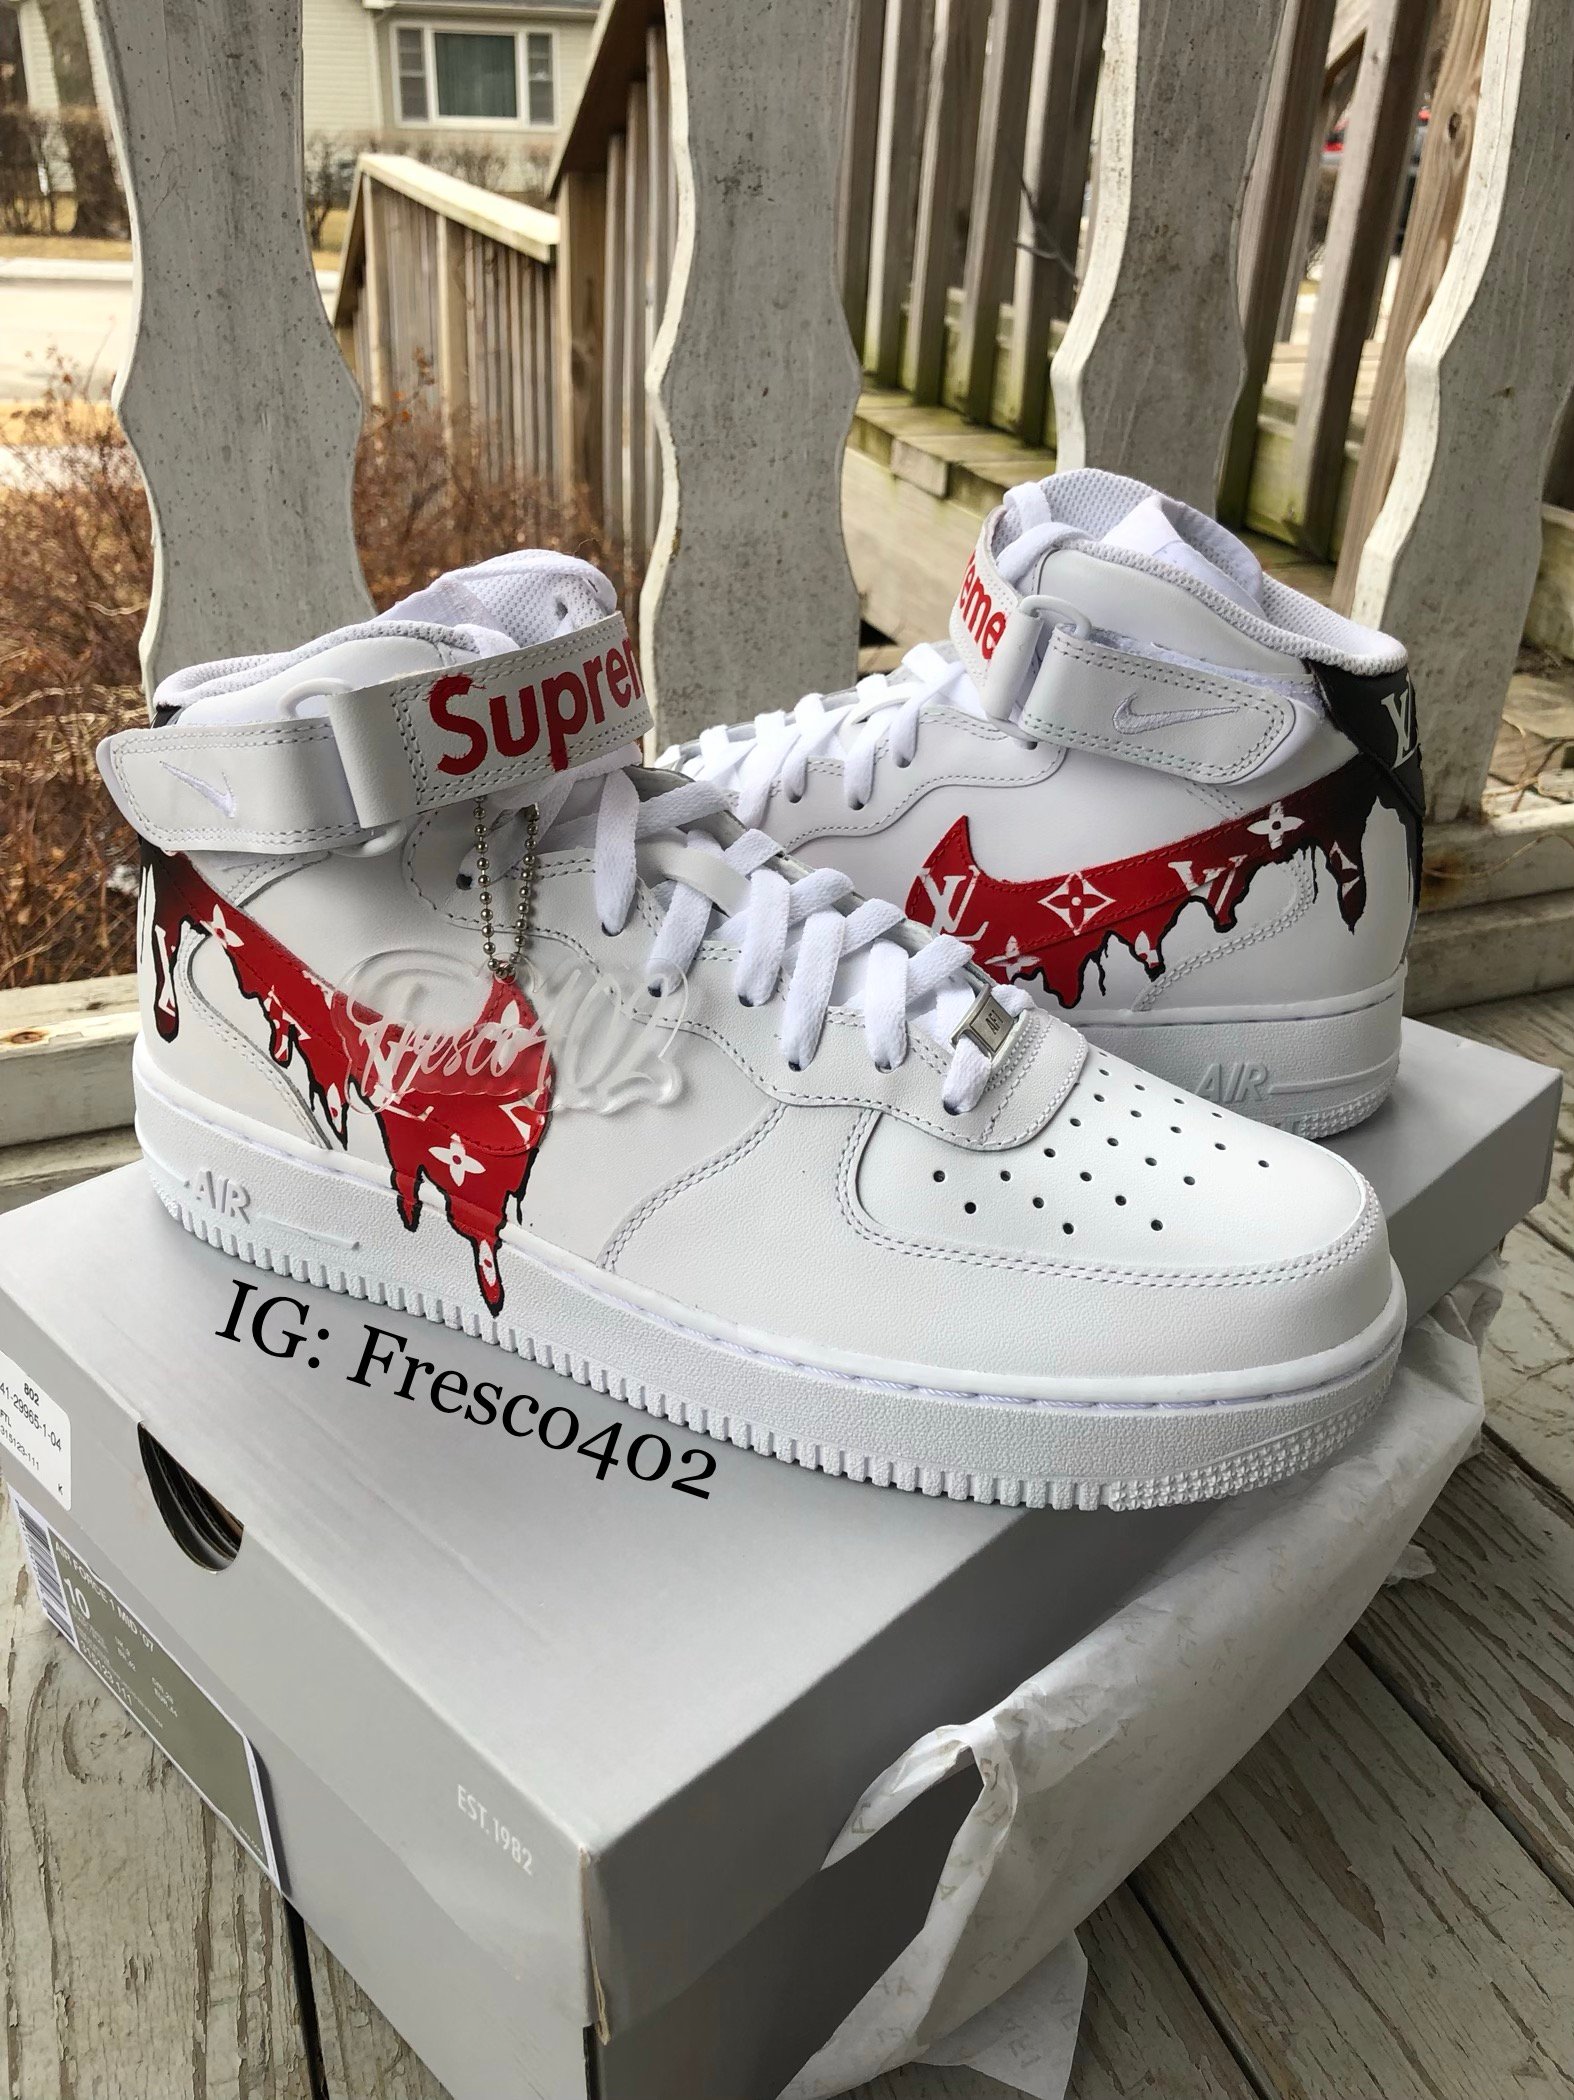 Buy Nike Men's Air Force 1 High Supreme Sp Inchsupreme Style